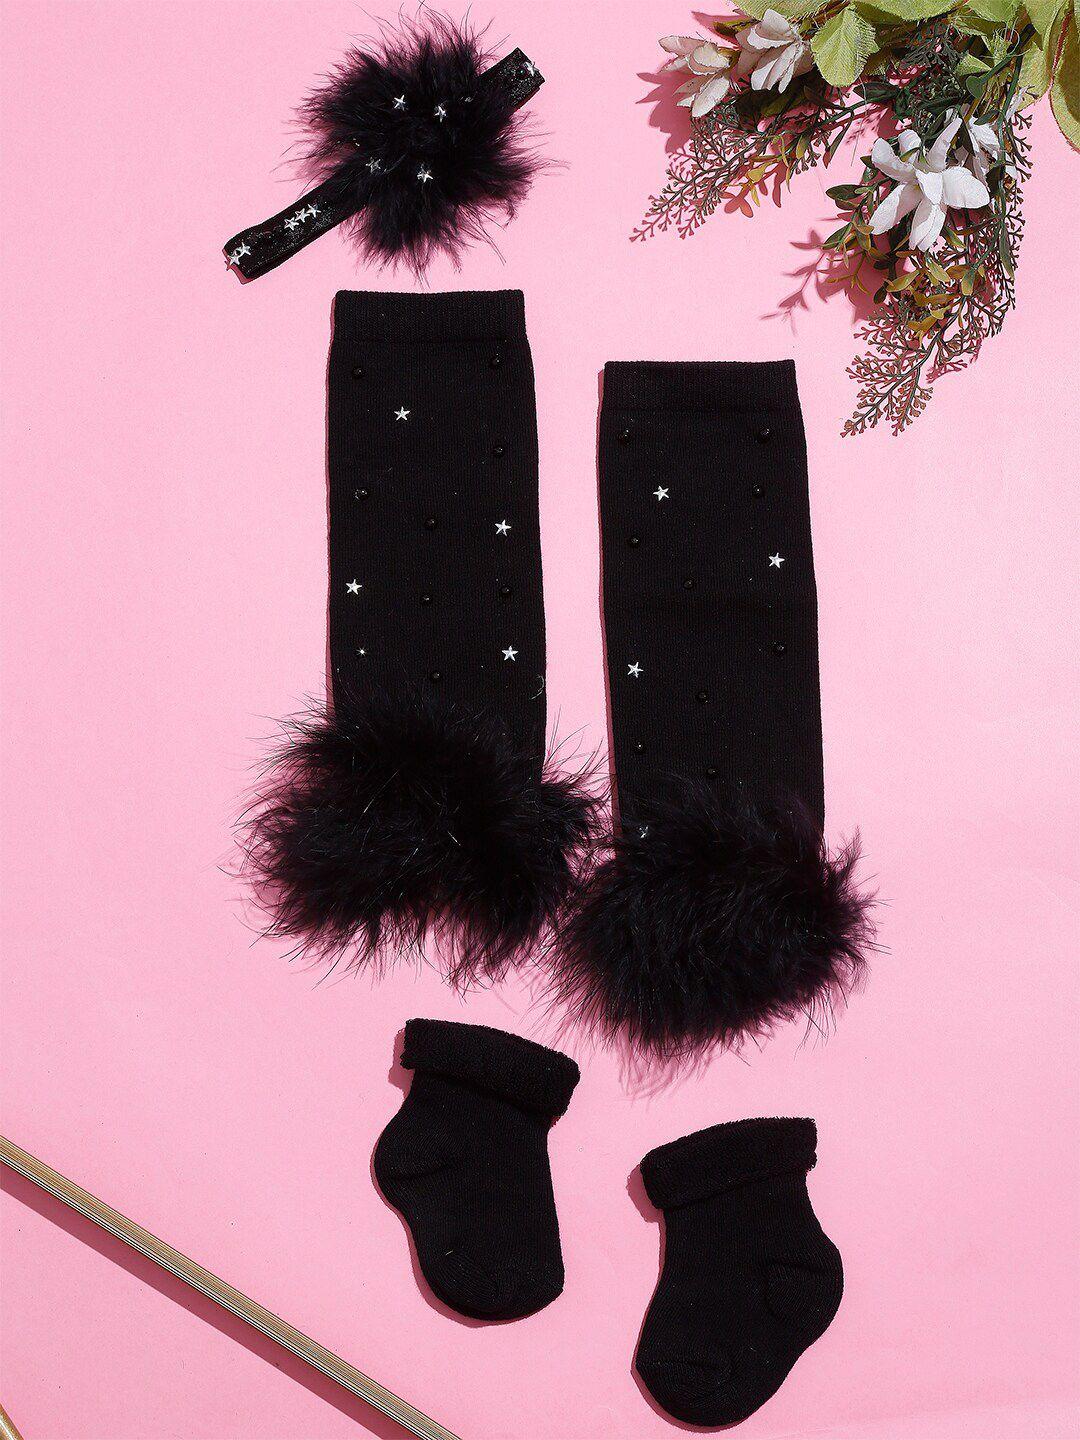 tipy tipy tap girls pack of 3 black patterned leg cover with socks & hairband set